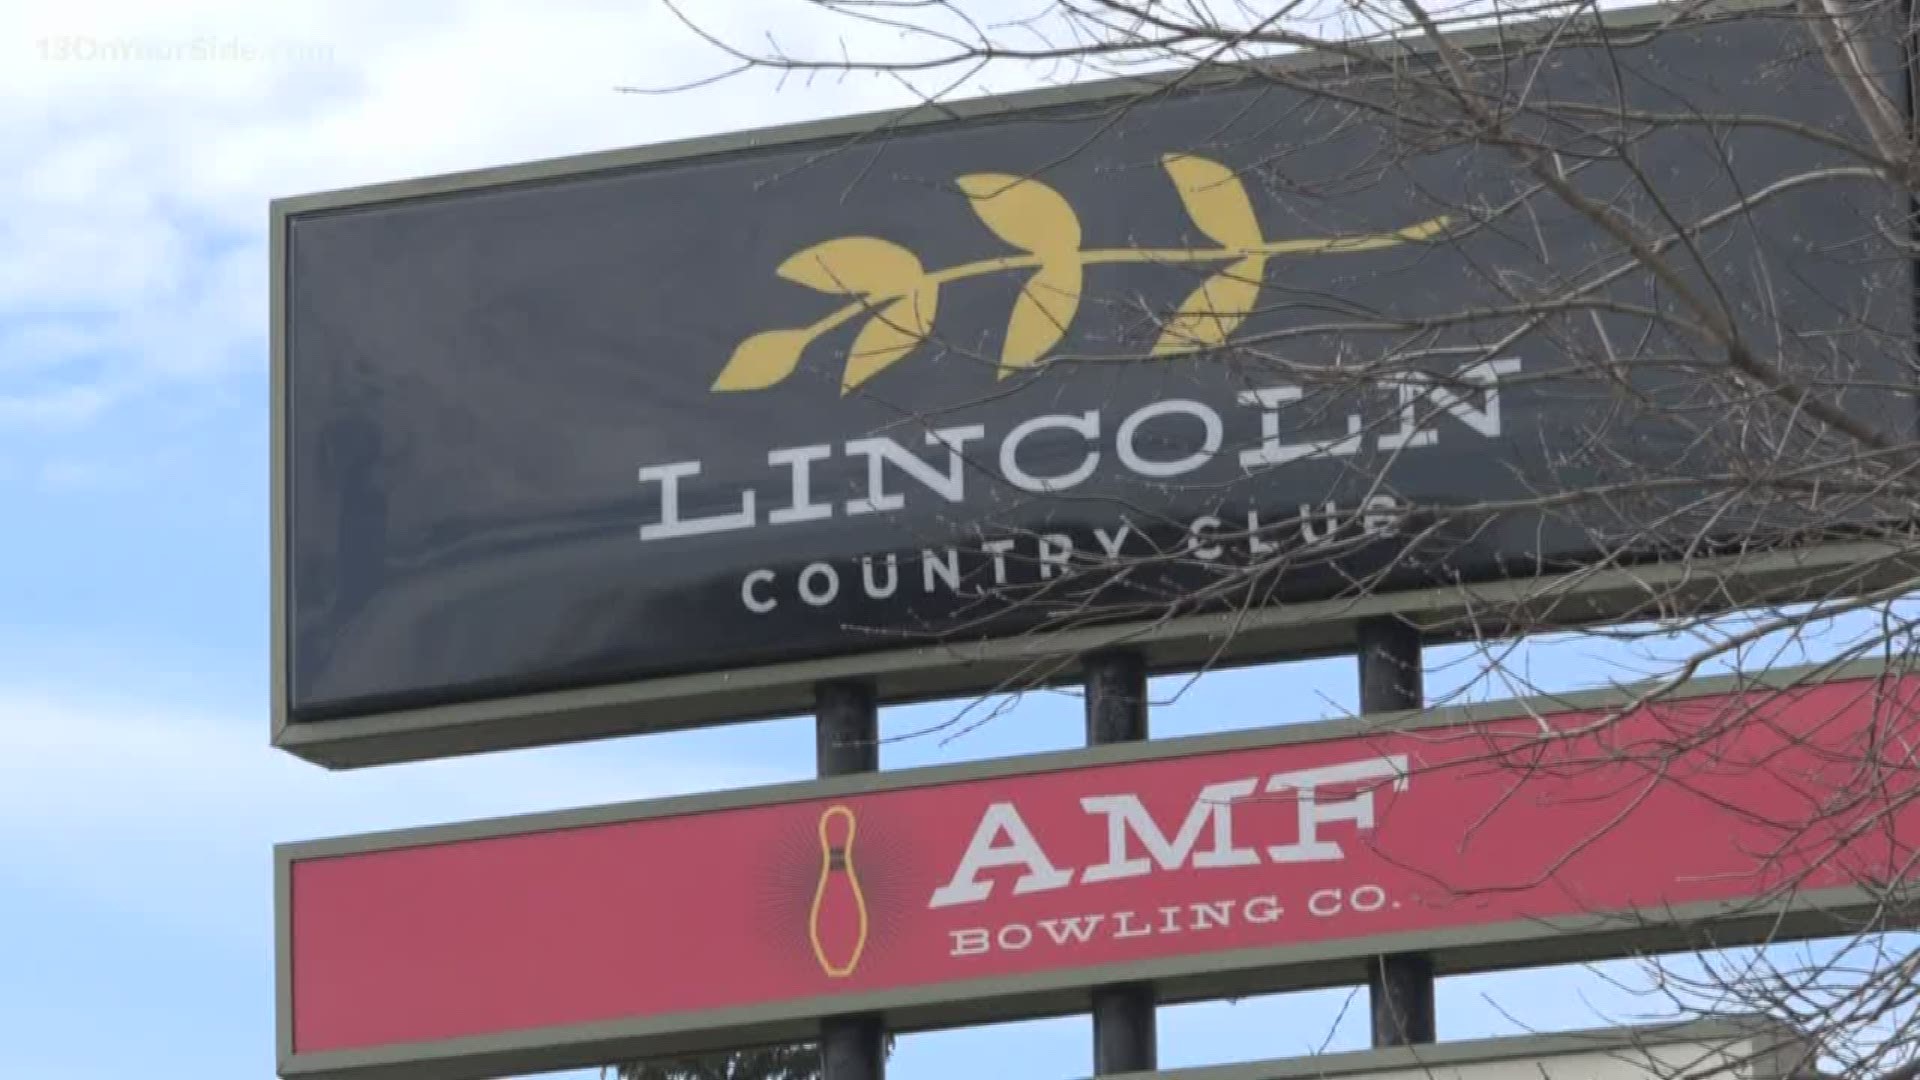 Proposed plans for the redevelopment of Lincoln Country Club calls for a new road to go through a subdivision.